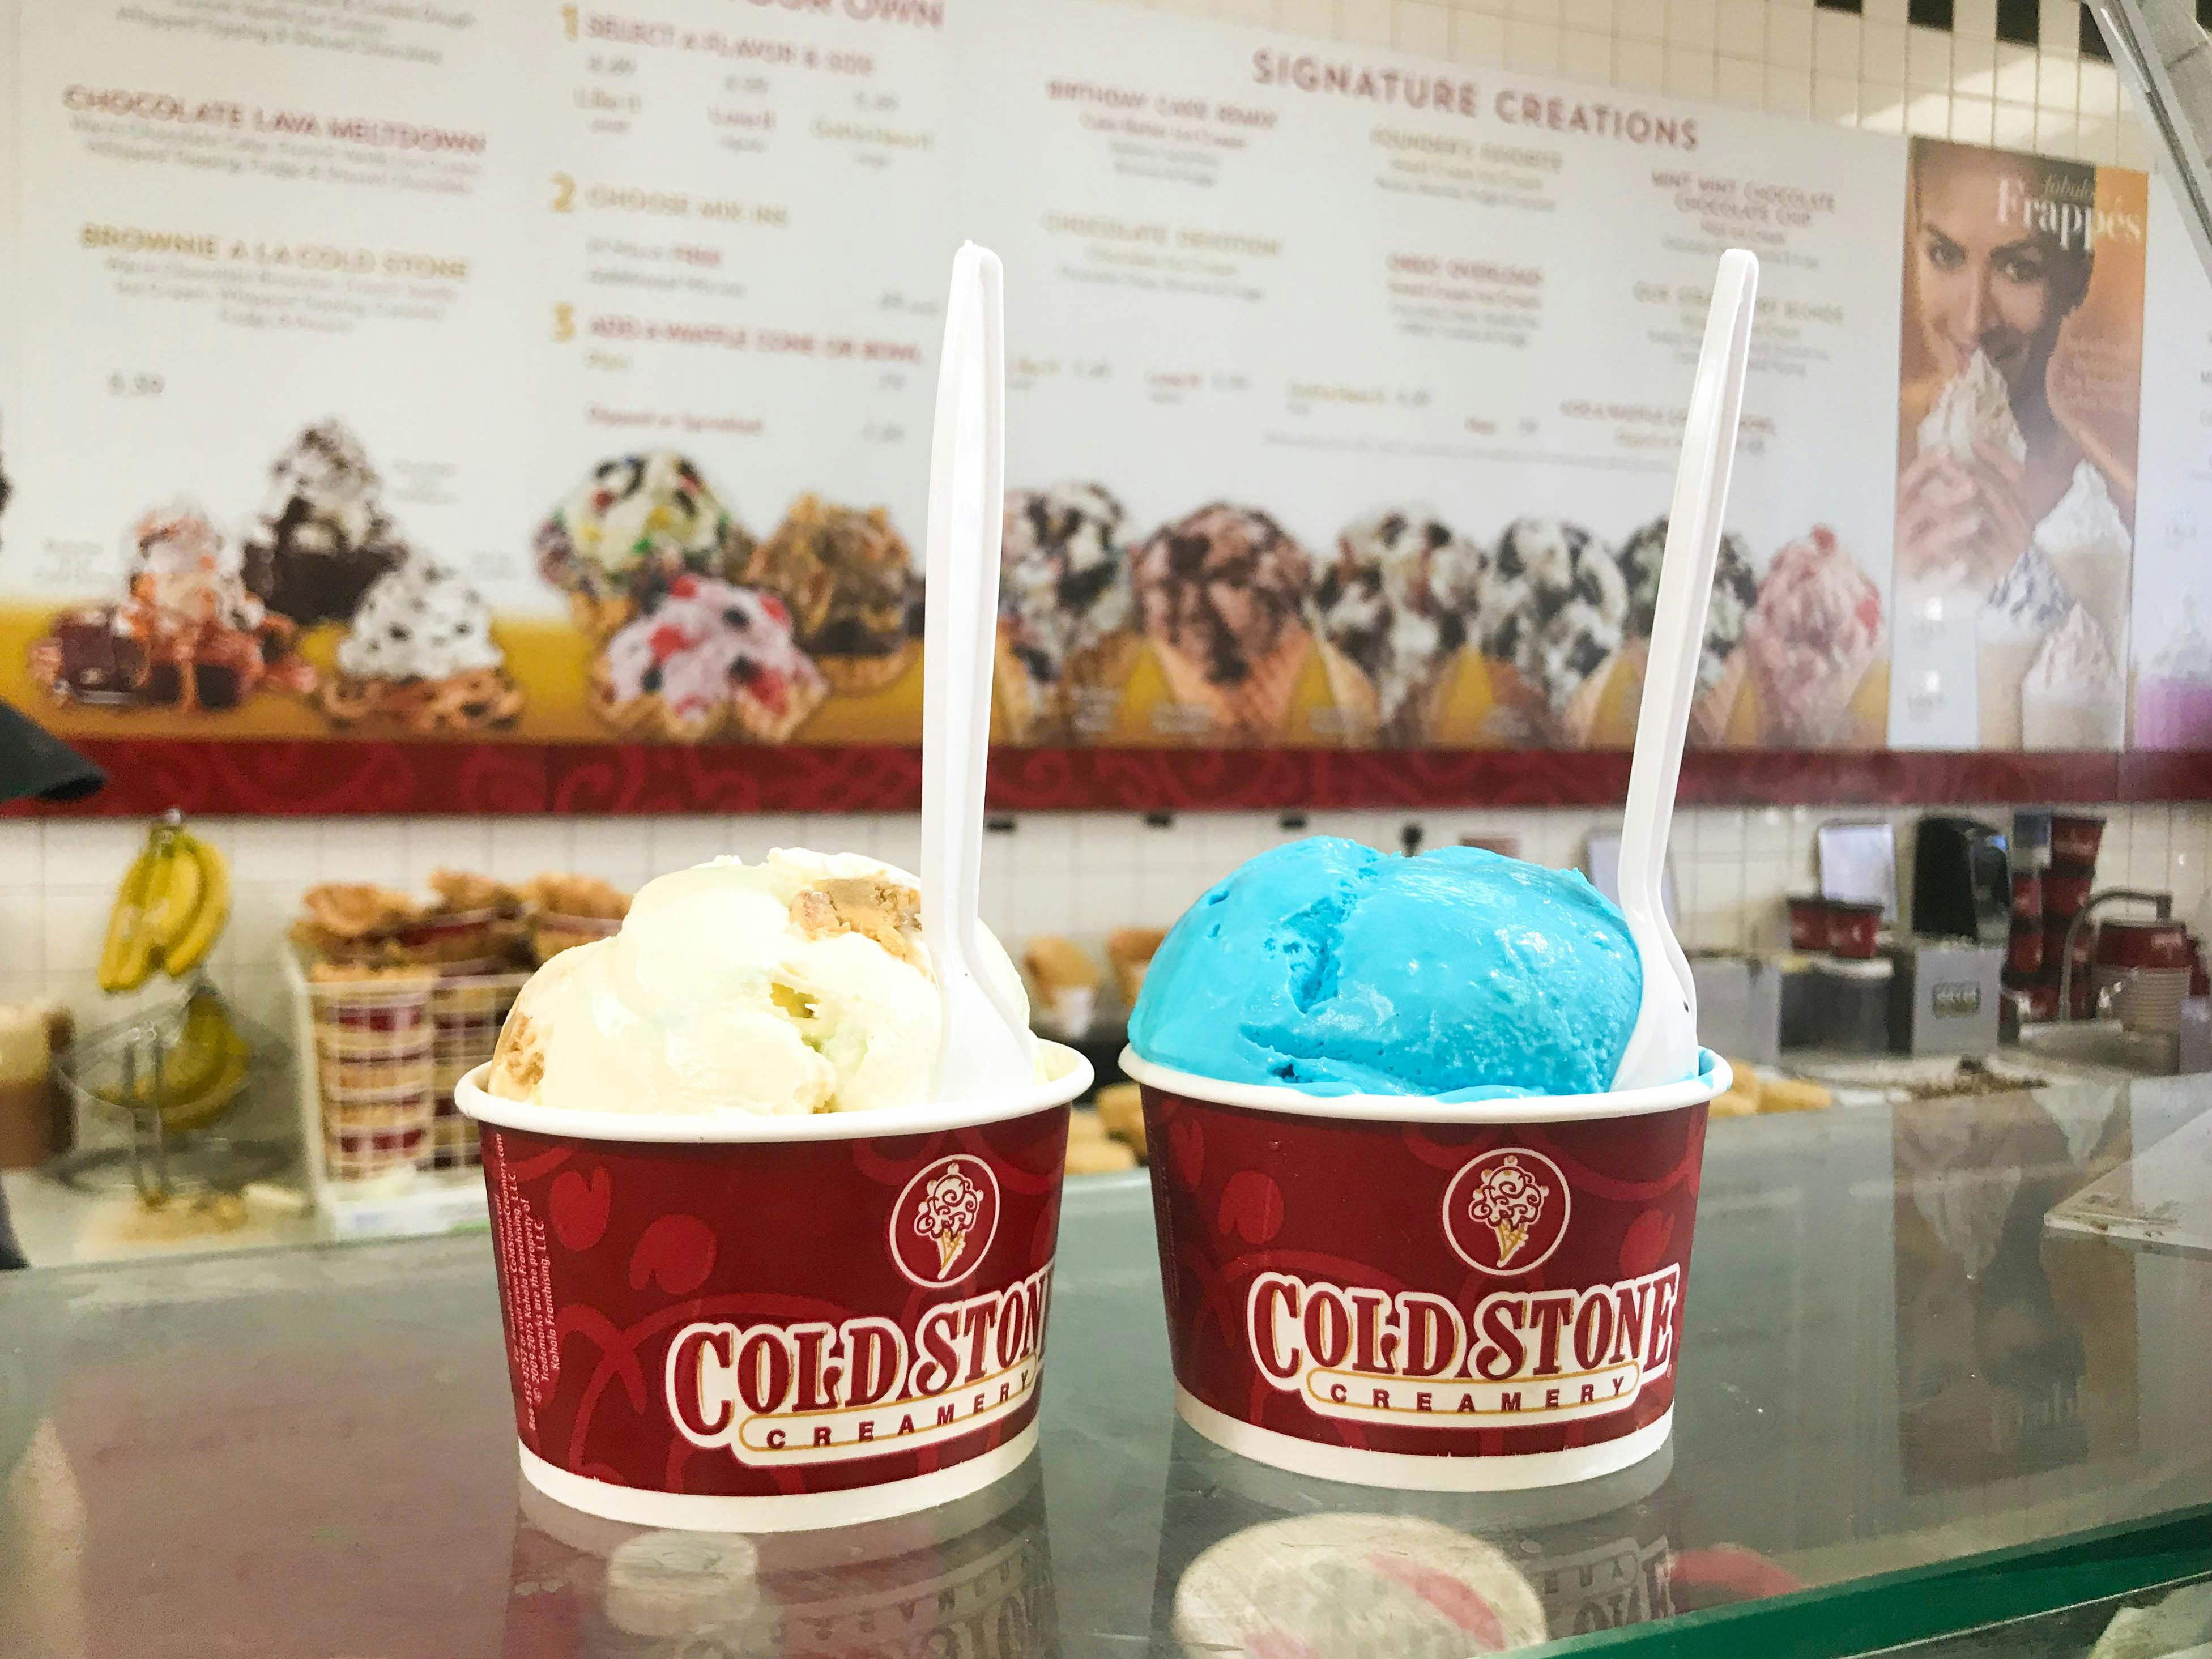 Two cups of small ice cream at Cold Stone Creamery on the counter.